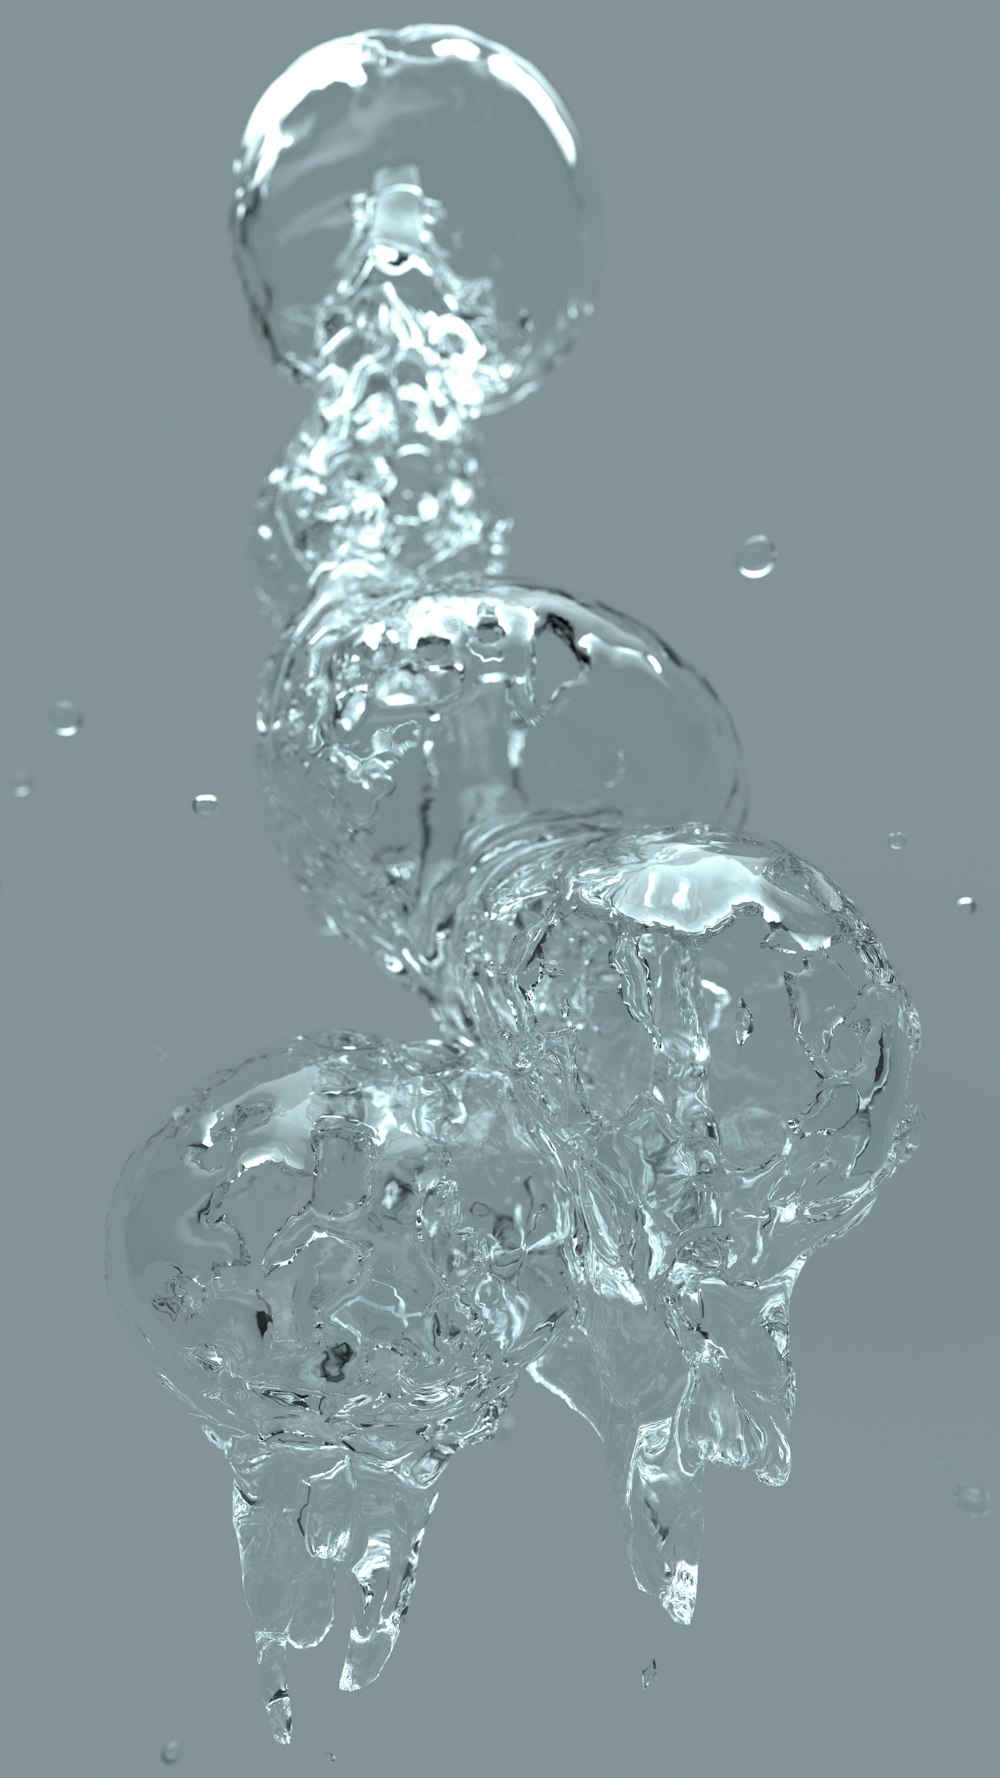 a close up of water splashing from a faucet